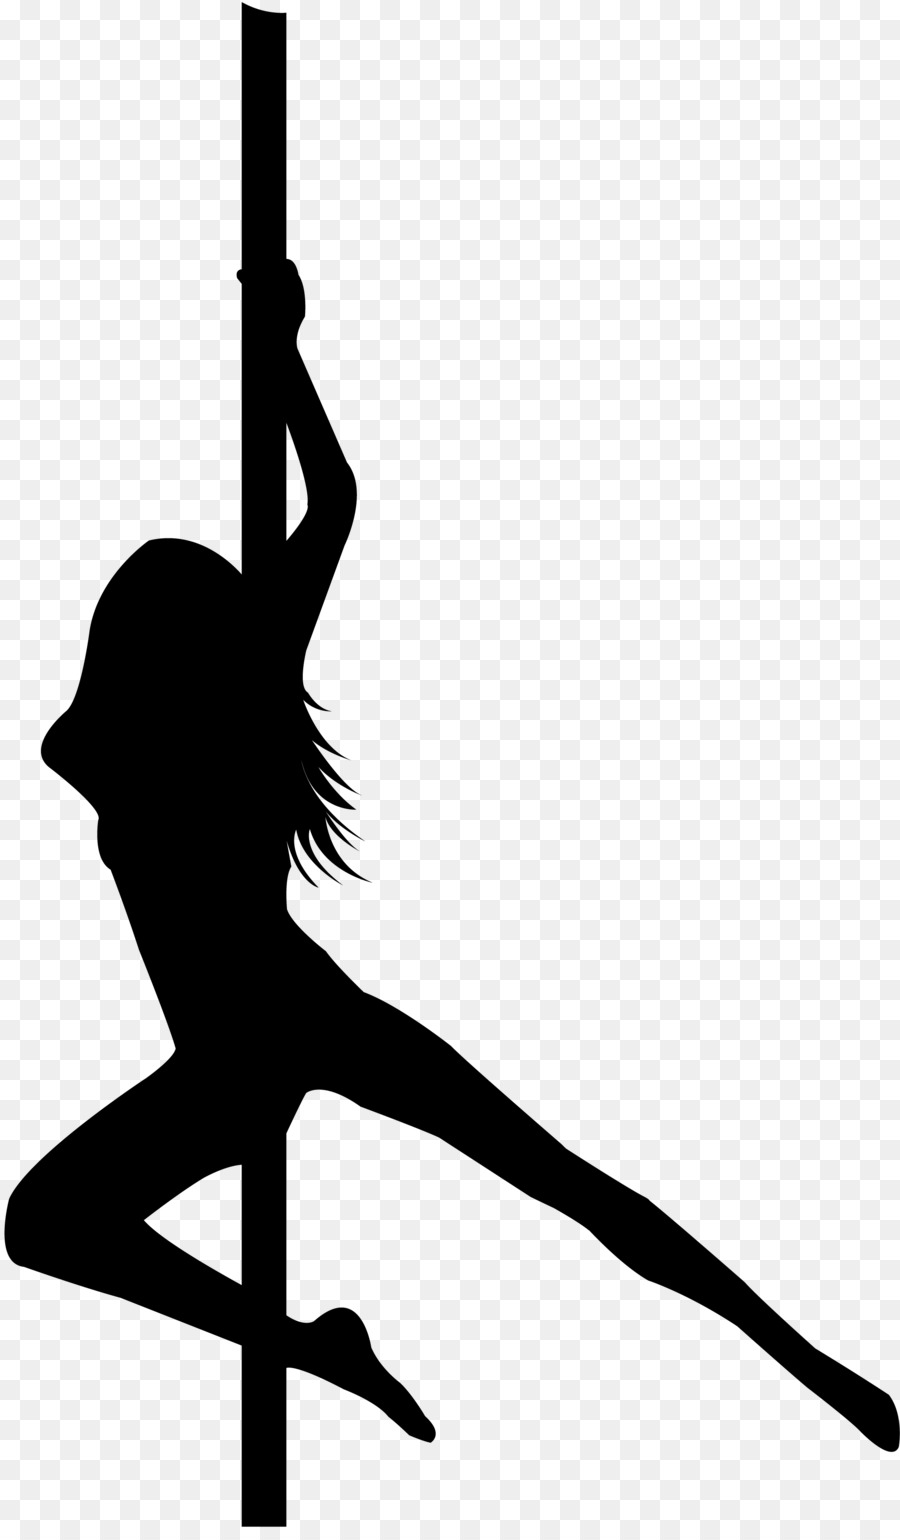 Pole dance Art - others png download - 2262*3840 - Free Transparent Pole Dance png Download.